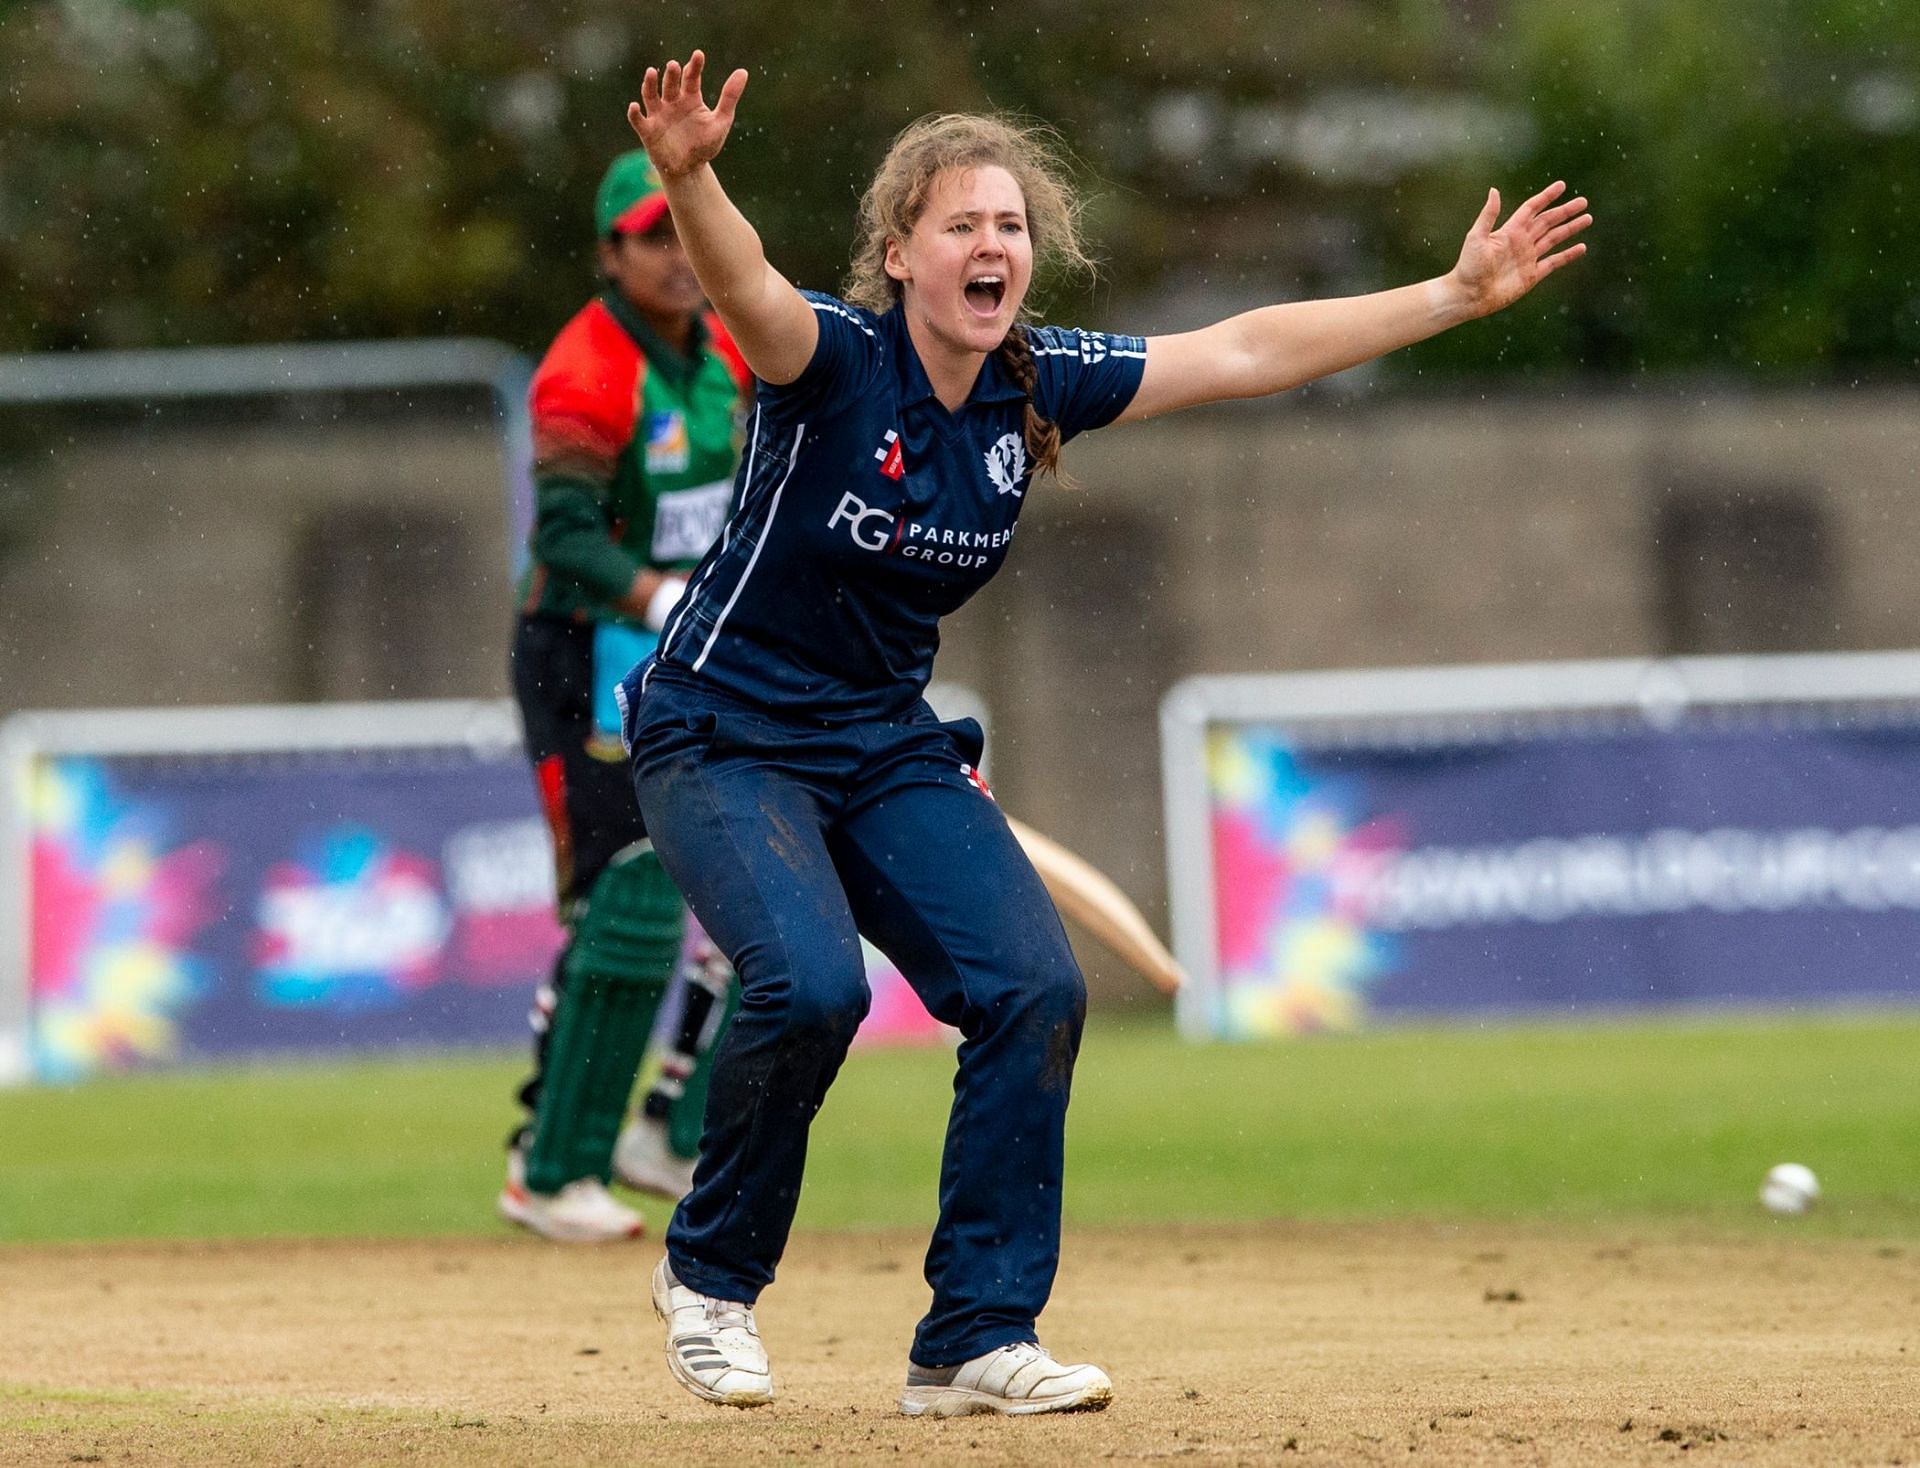 Kathryn Bryce in action (Image Courtesy: Cricket Scotland)